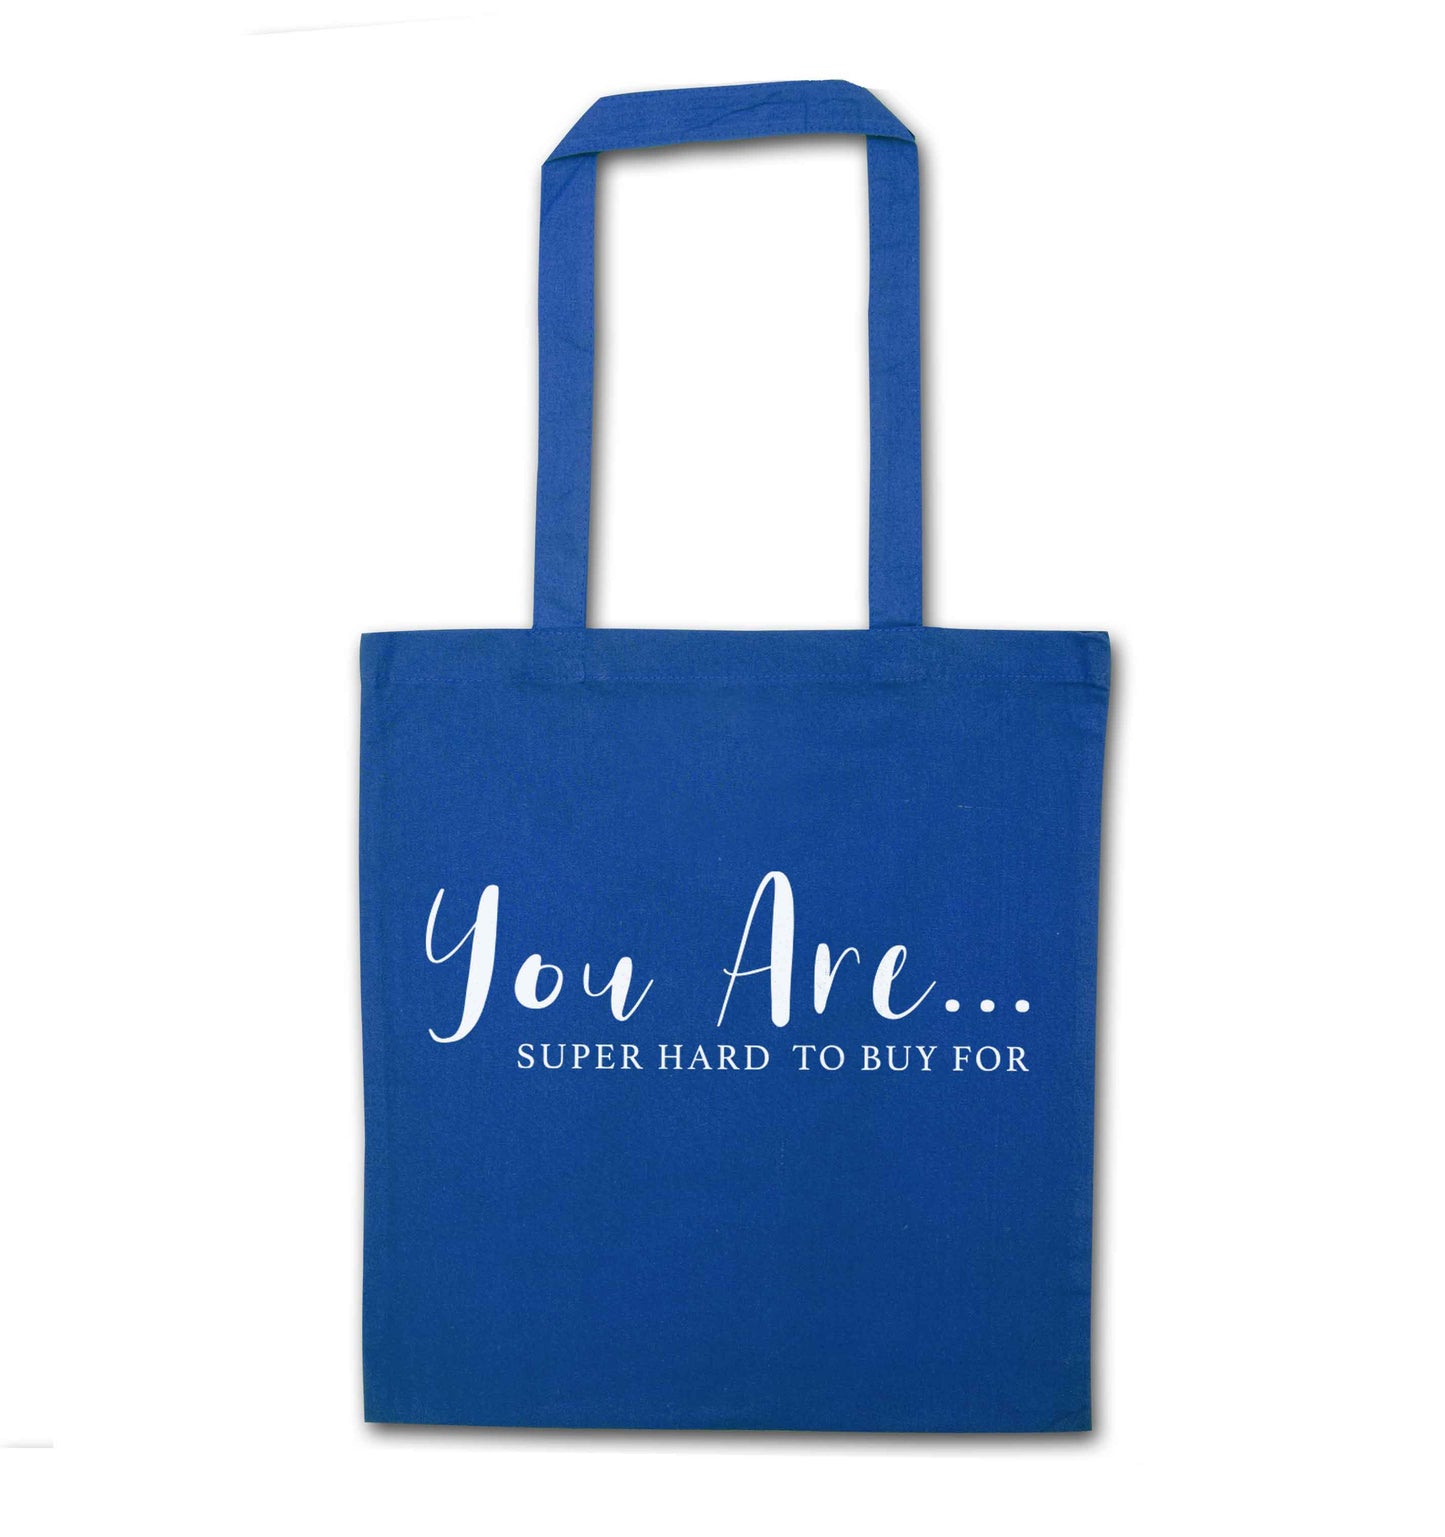 You are super hard to buy for blue tote bag